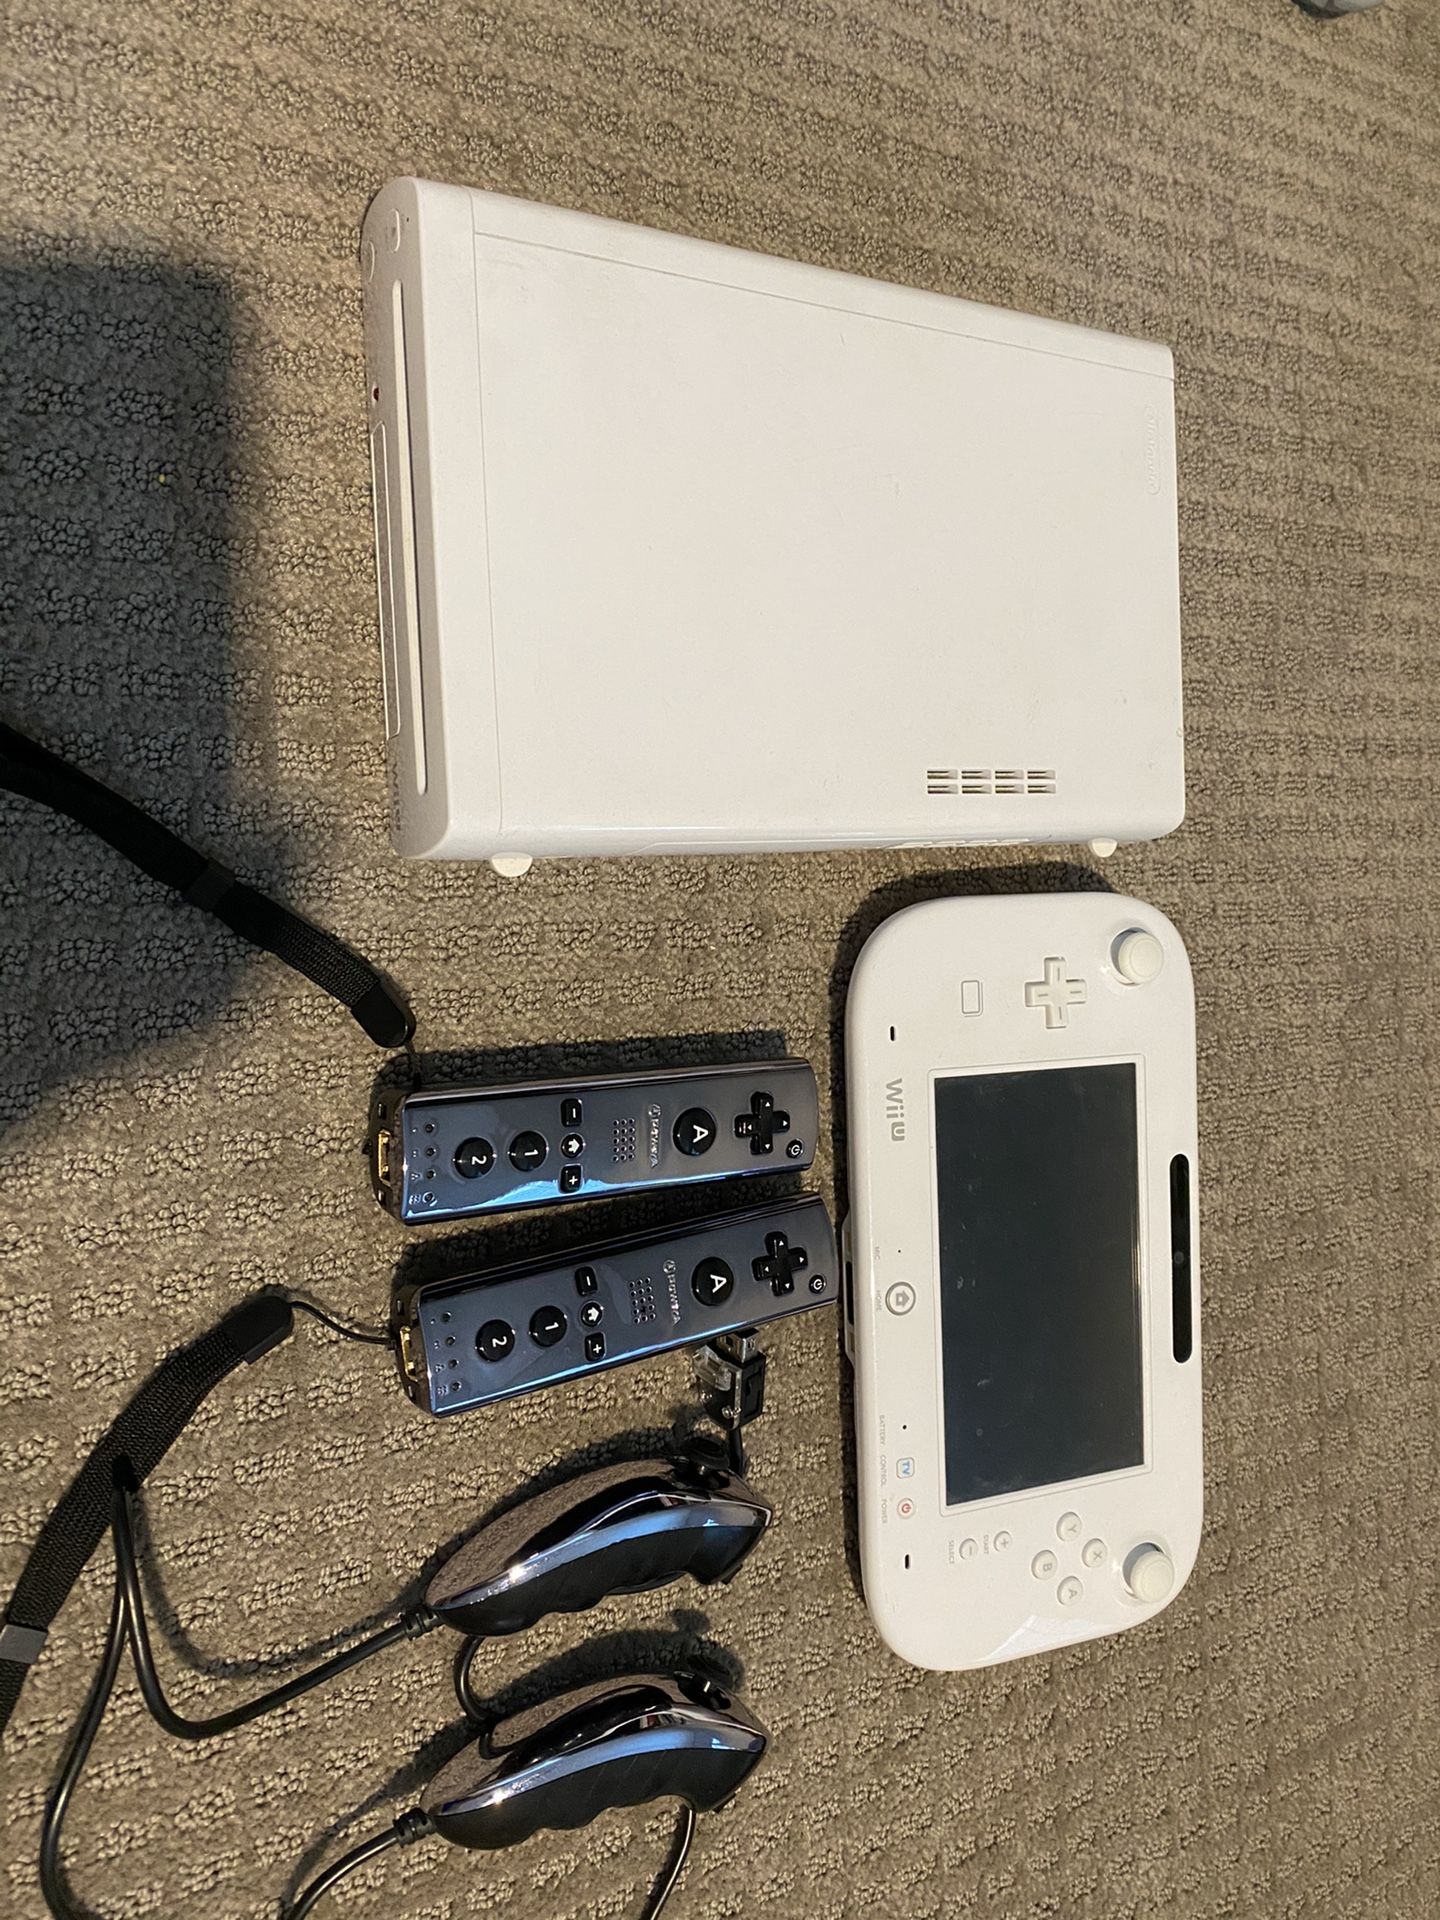 Nintendo Wii U console, controllers, fit and games